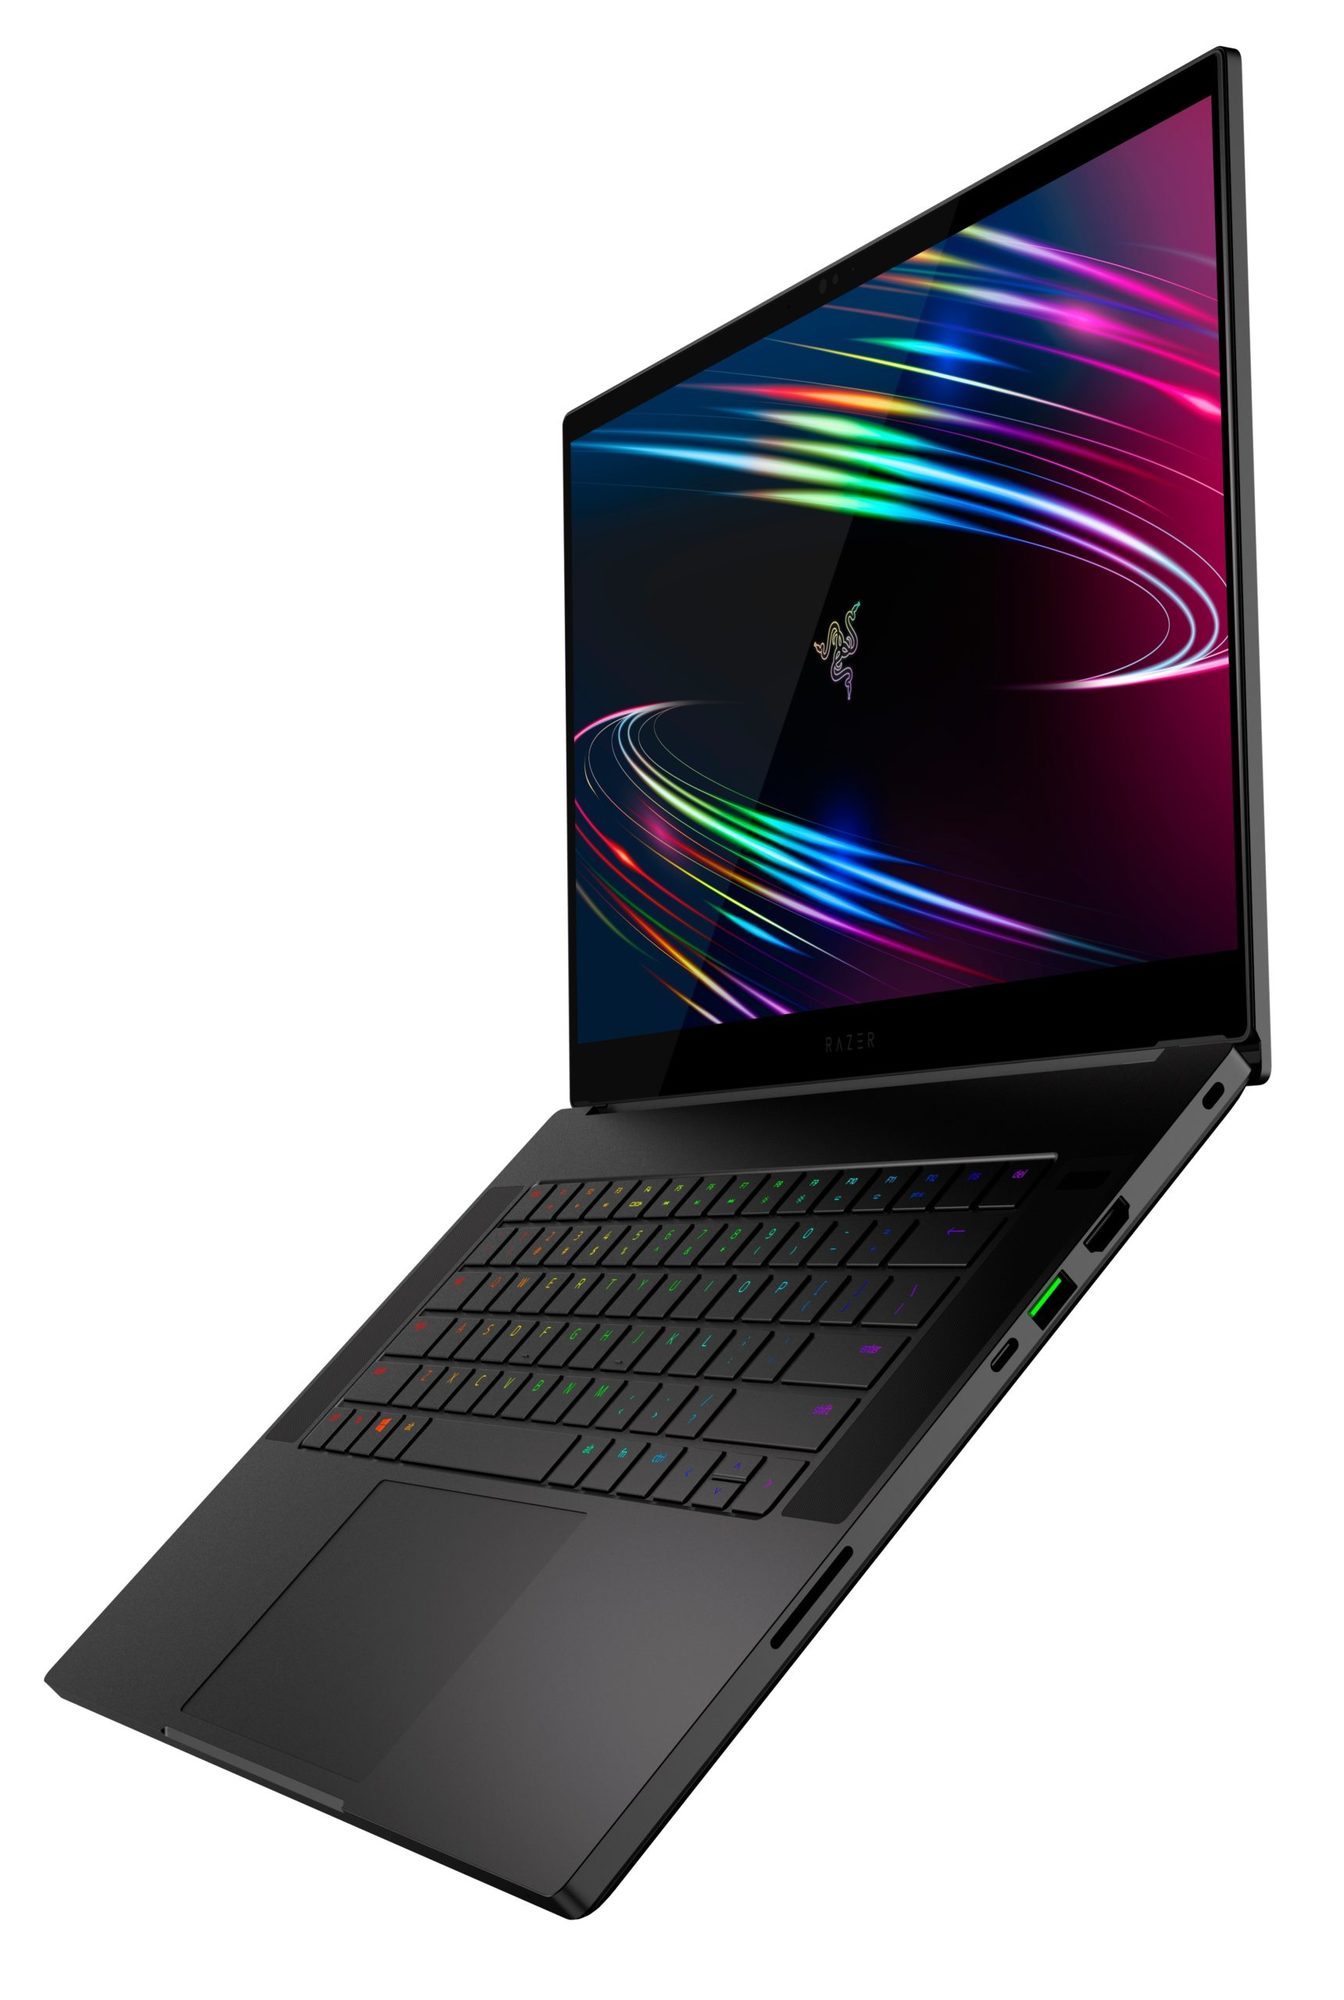 New Razer Blade 15 gaming laptop available 040dc0ac7283295a1f2bc5e7dc630ec1-scaled.jpg